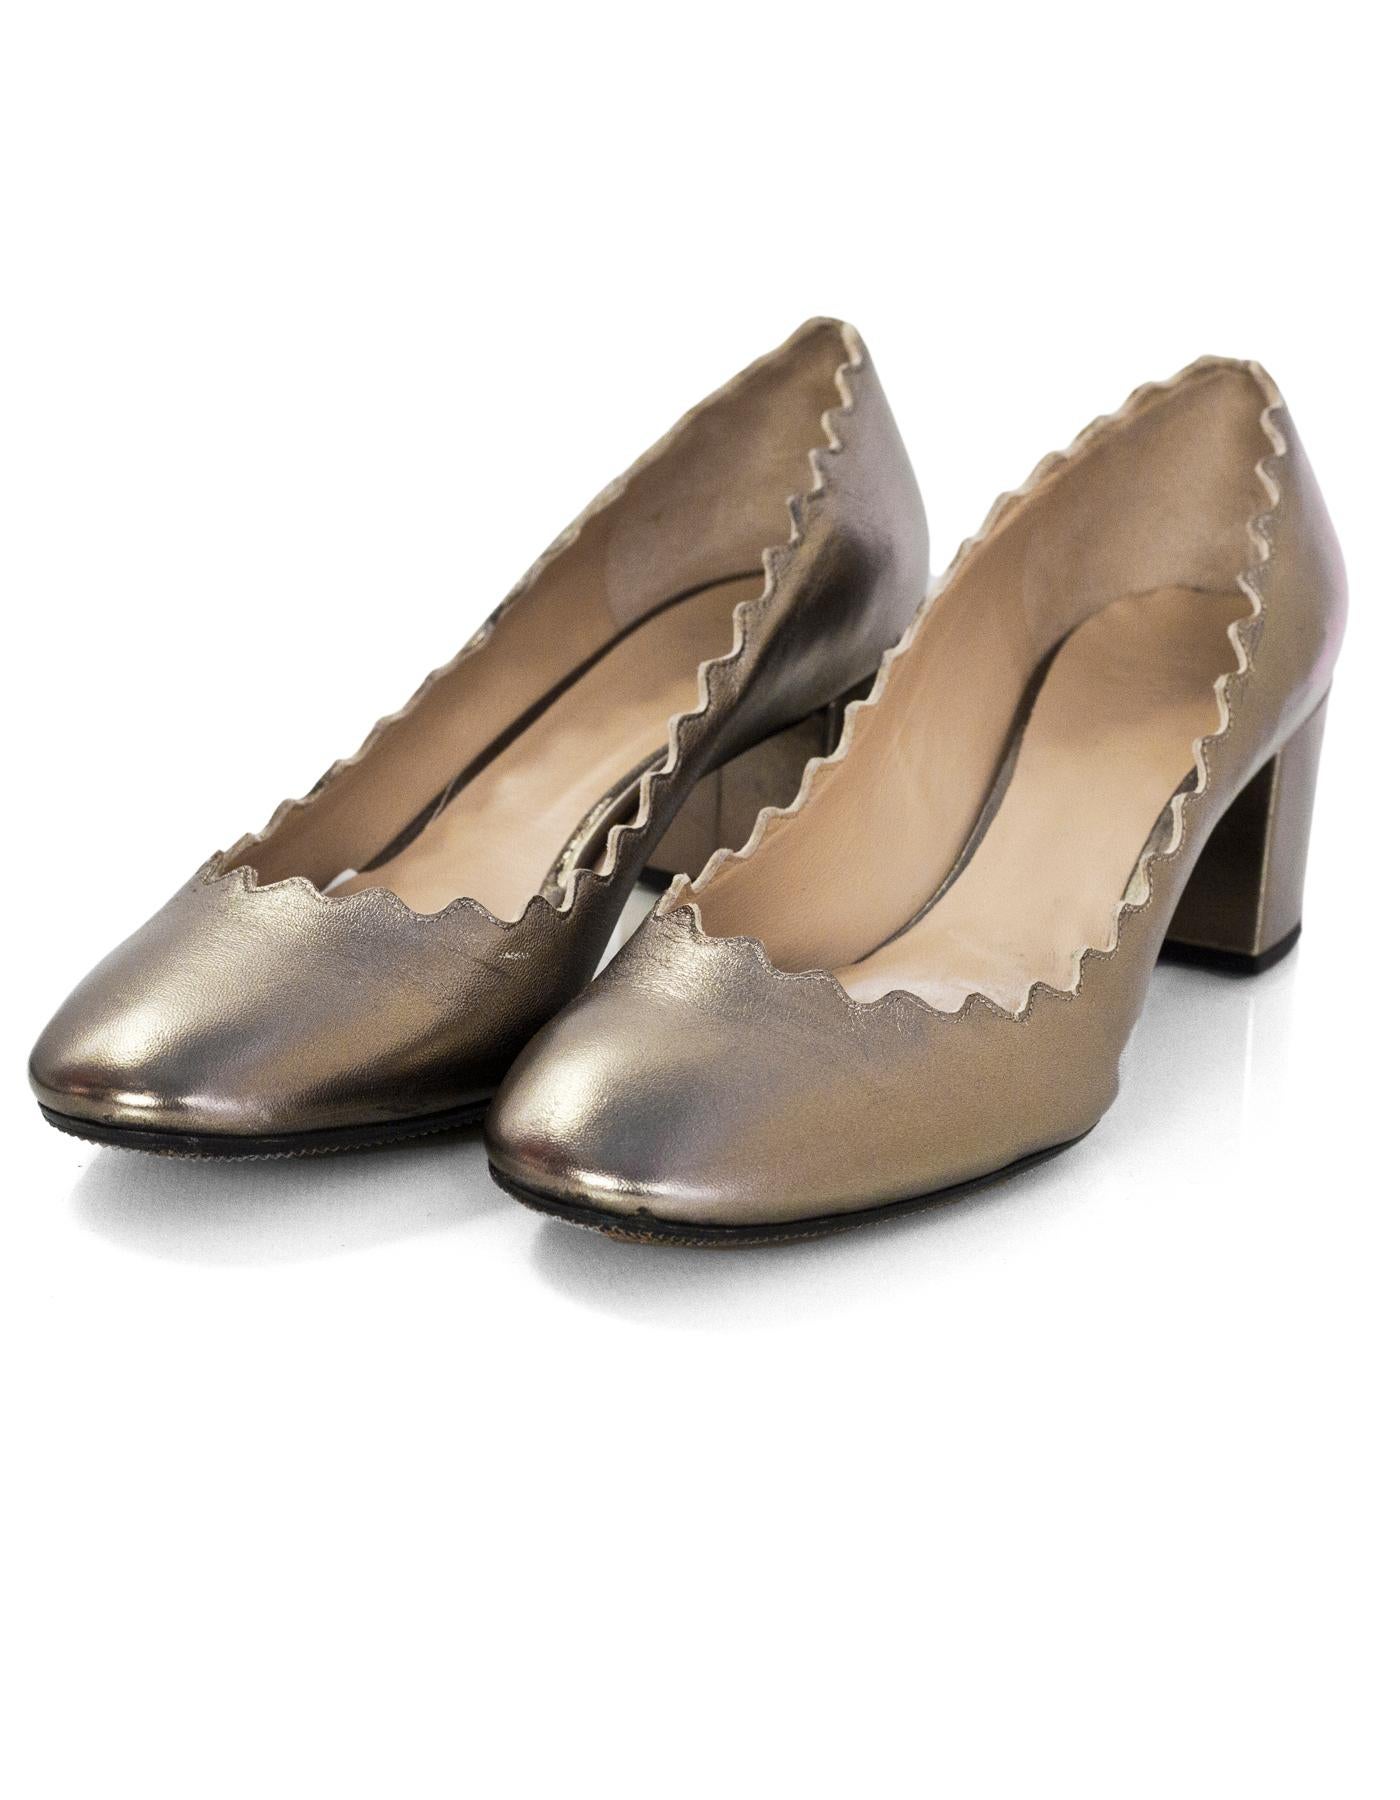 Chloe Bronze Leather Scalloped Lauren Pumps Sz 39

Made In: Italy
Color: Bronze
Materials: Leather
Closure/Opening: Slide on
Sole Stamp: Chloe made in italy 39
Overall Condition: Very good pre-owned condition with the exception of being re-soled,